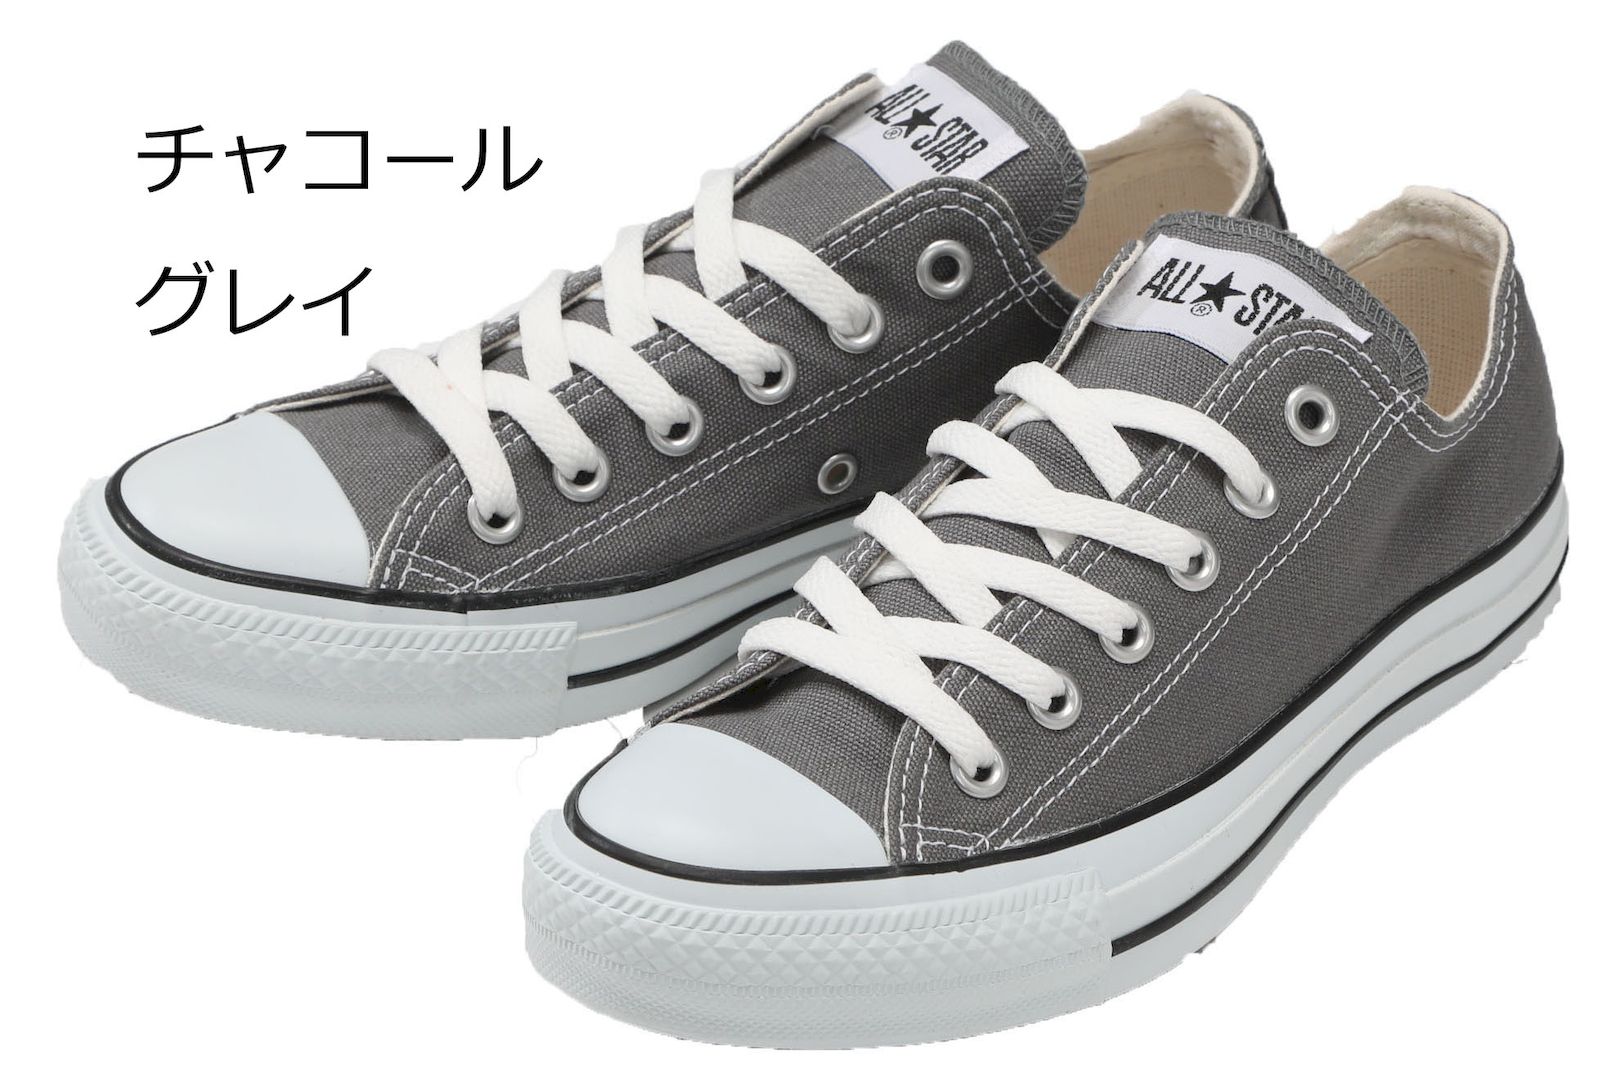 grey converse shoes womens